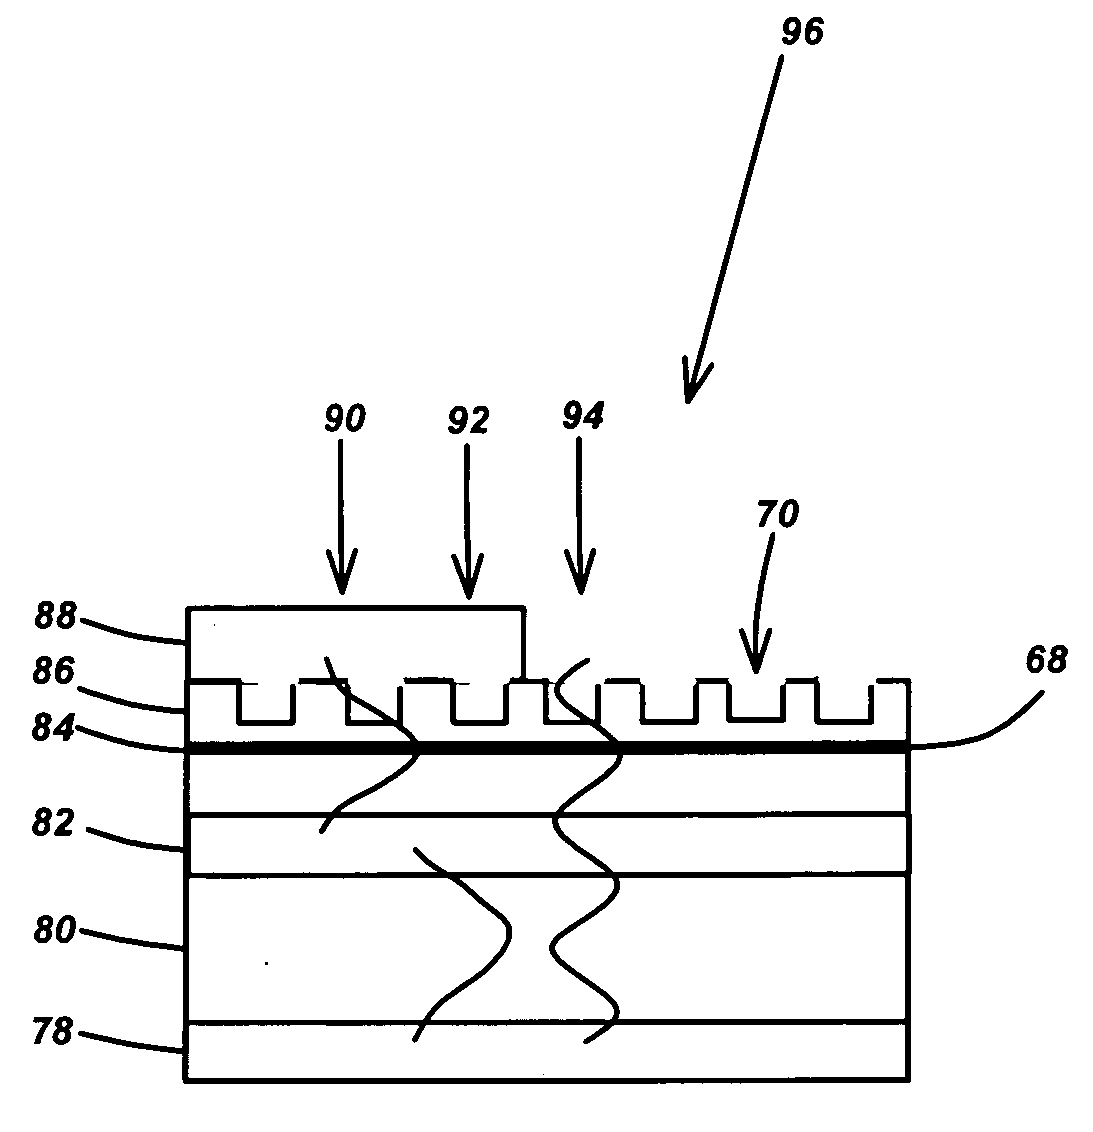 High efficiency light emitting diode (LED) with optimized photonic crystal extractor